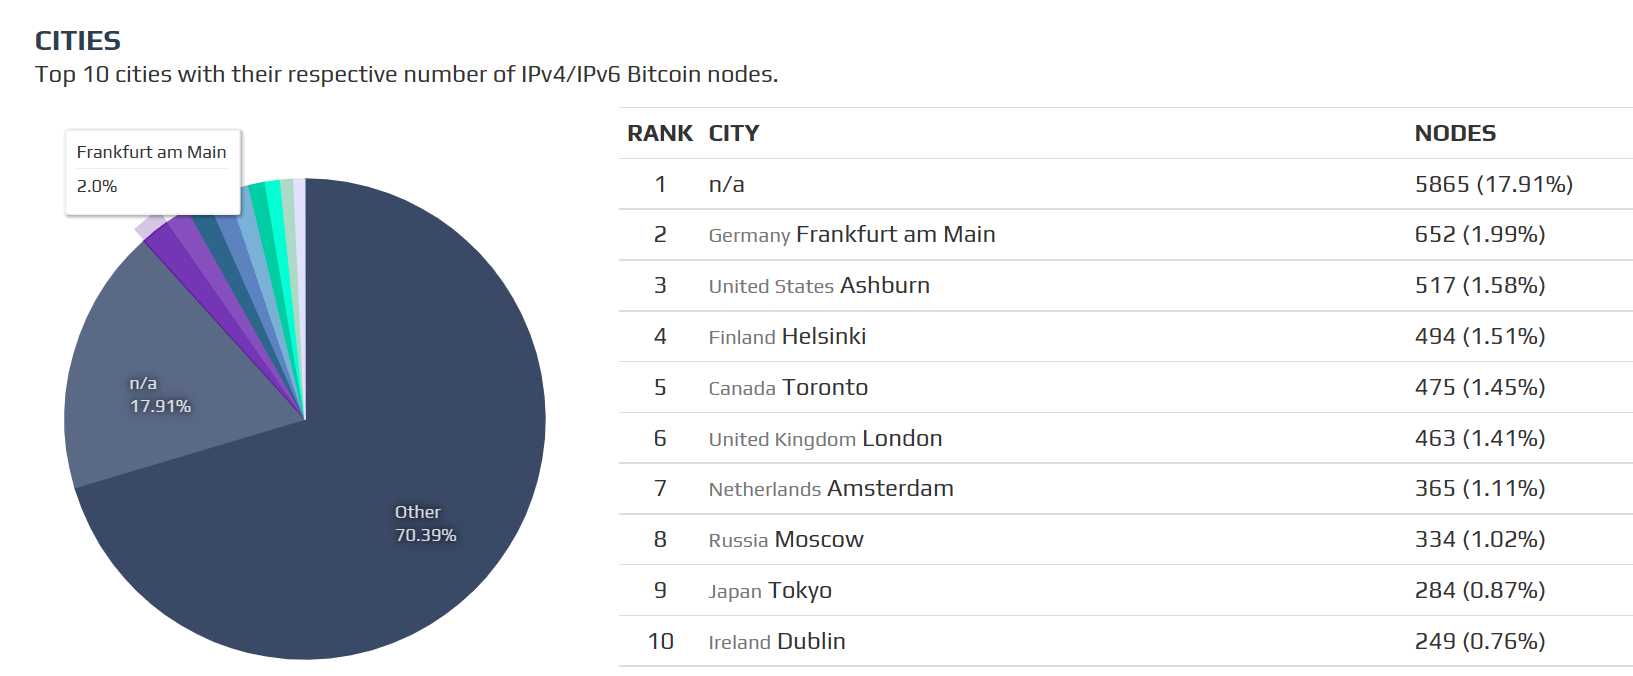 List of top 10 cities with most number of Bitcoin nodes. Source: Bitnodes